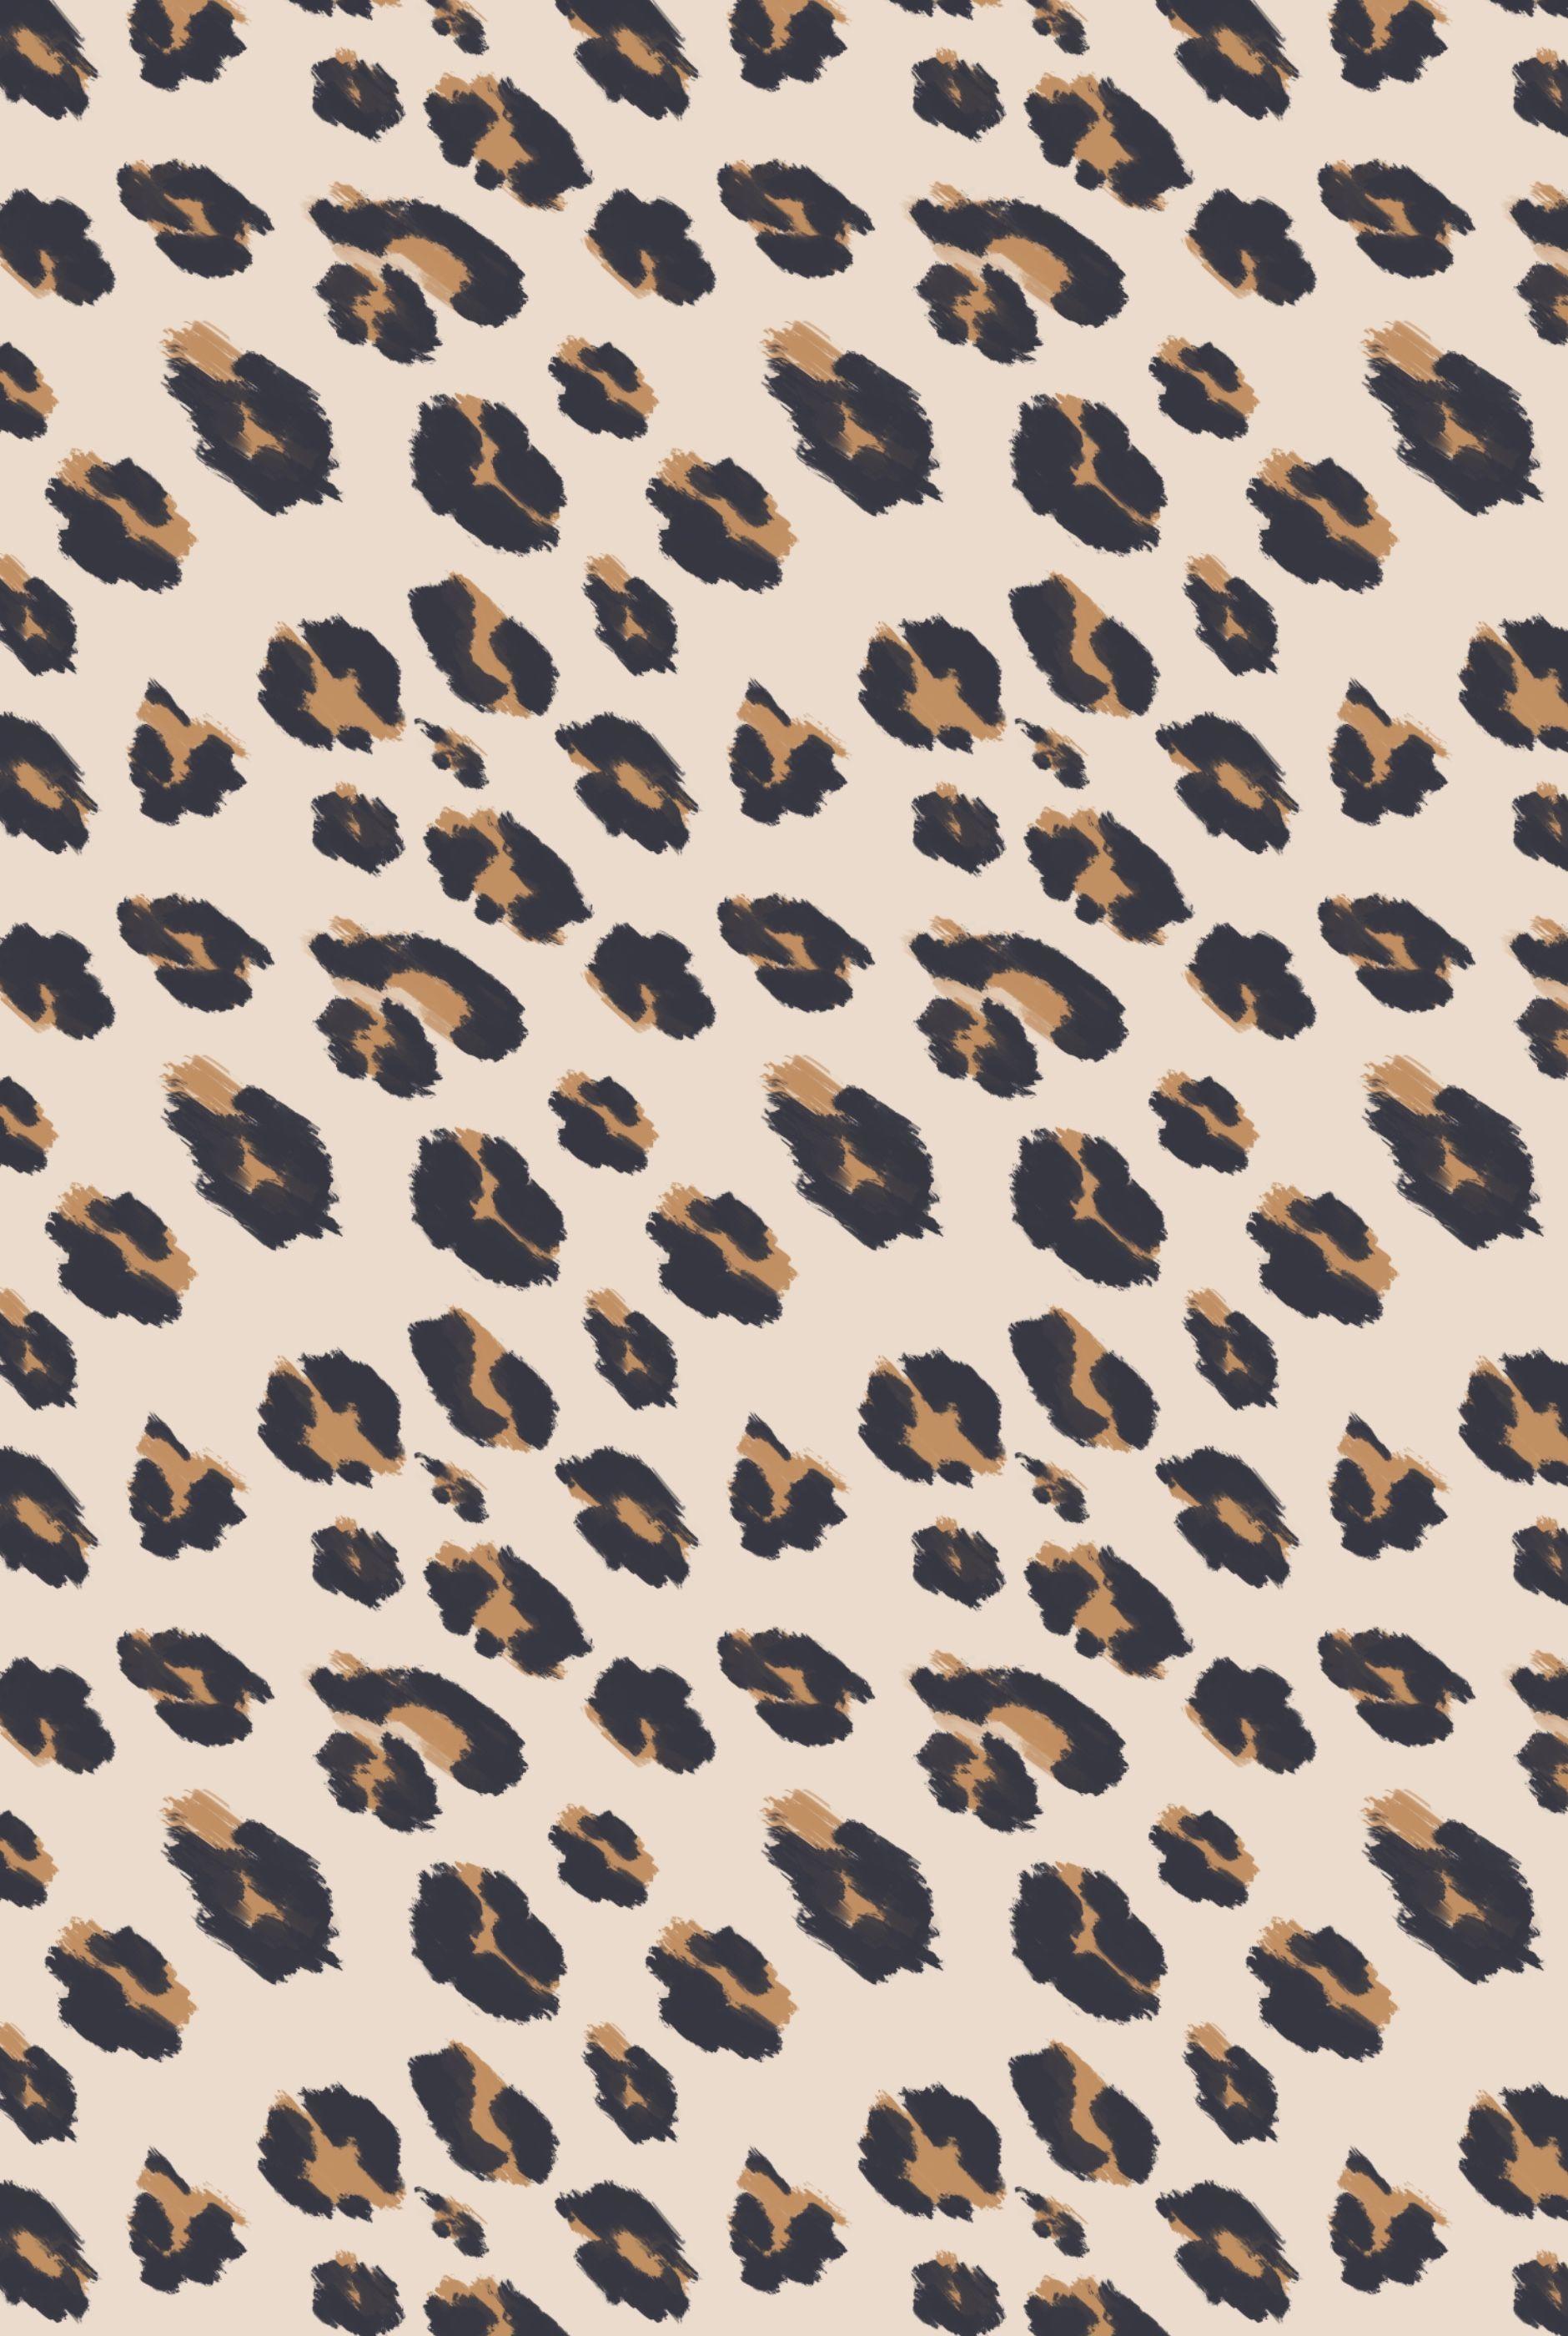 pin // dianaherselff. Animal print wallpaper, Collage background